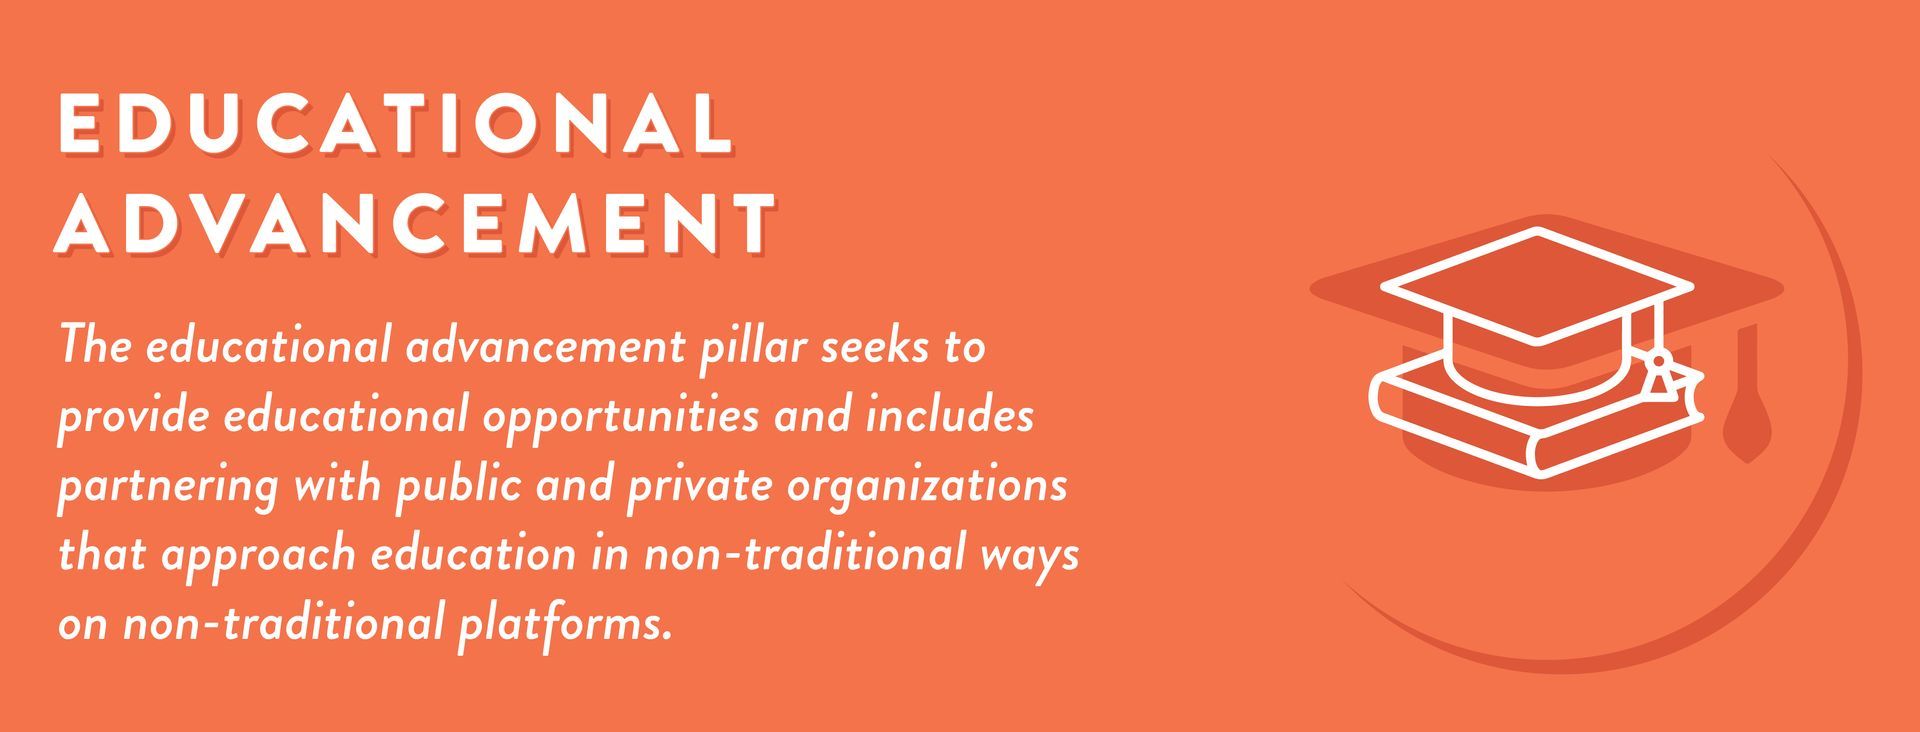 The educational advancement pillar seeks to provide educational opportunities and includes partnering with public and private organizations that approach education in non-traditional ways on non-traditional platforms.